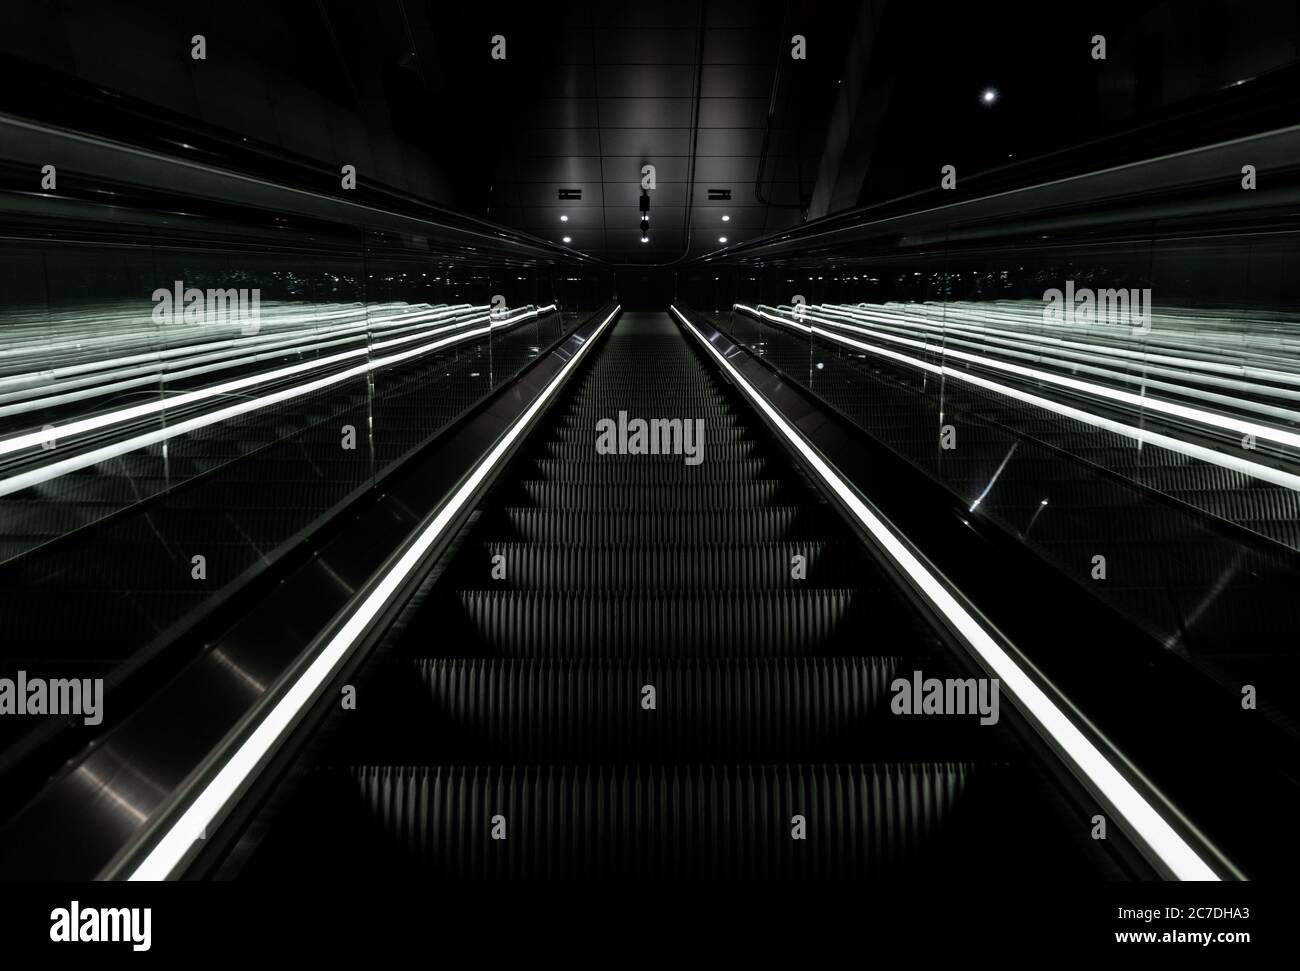 Low angle shot of an escalator going up in a metro station in Vijzelgracht, Netherlands Stock Photo